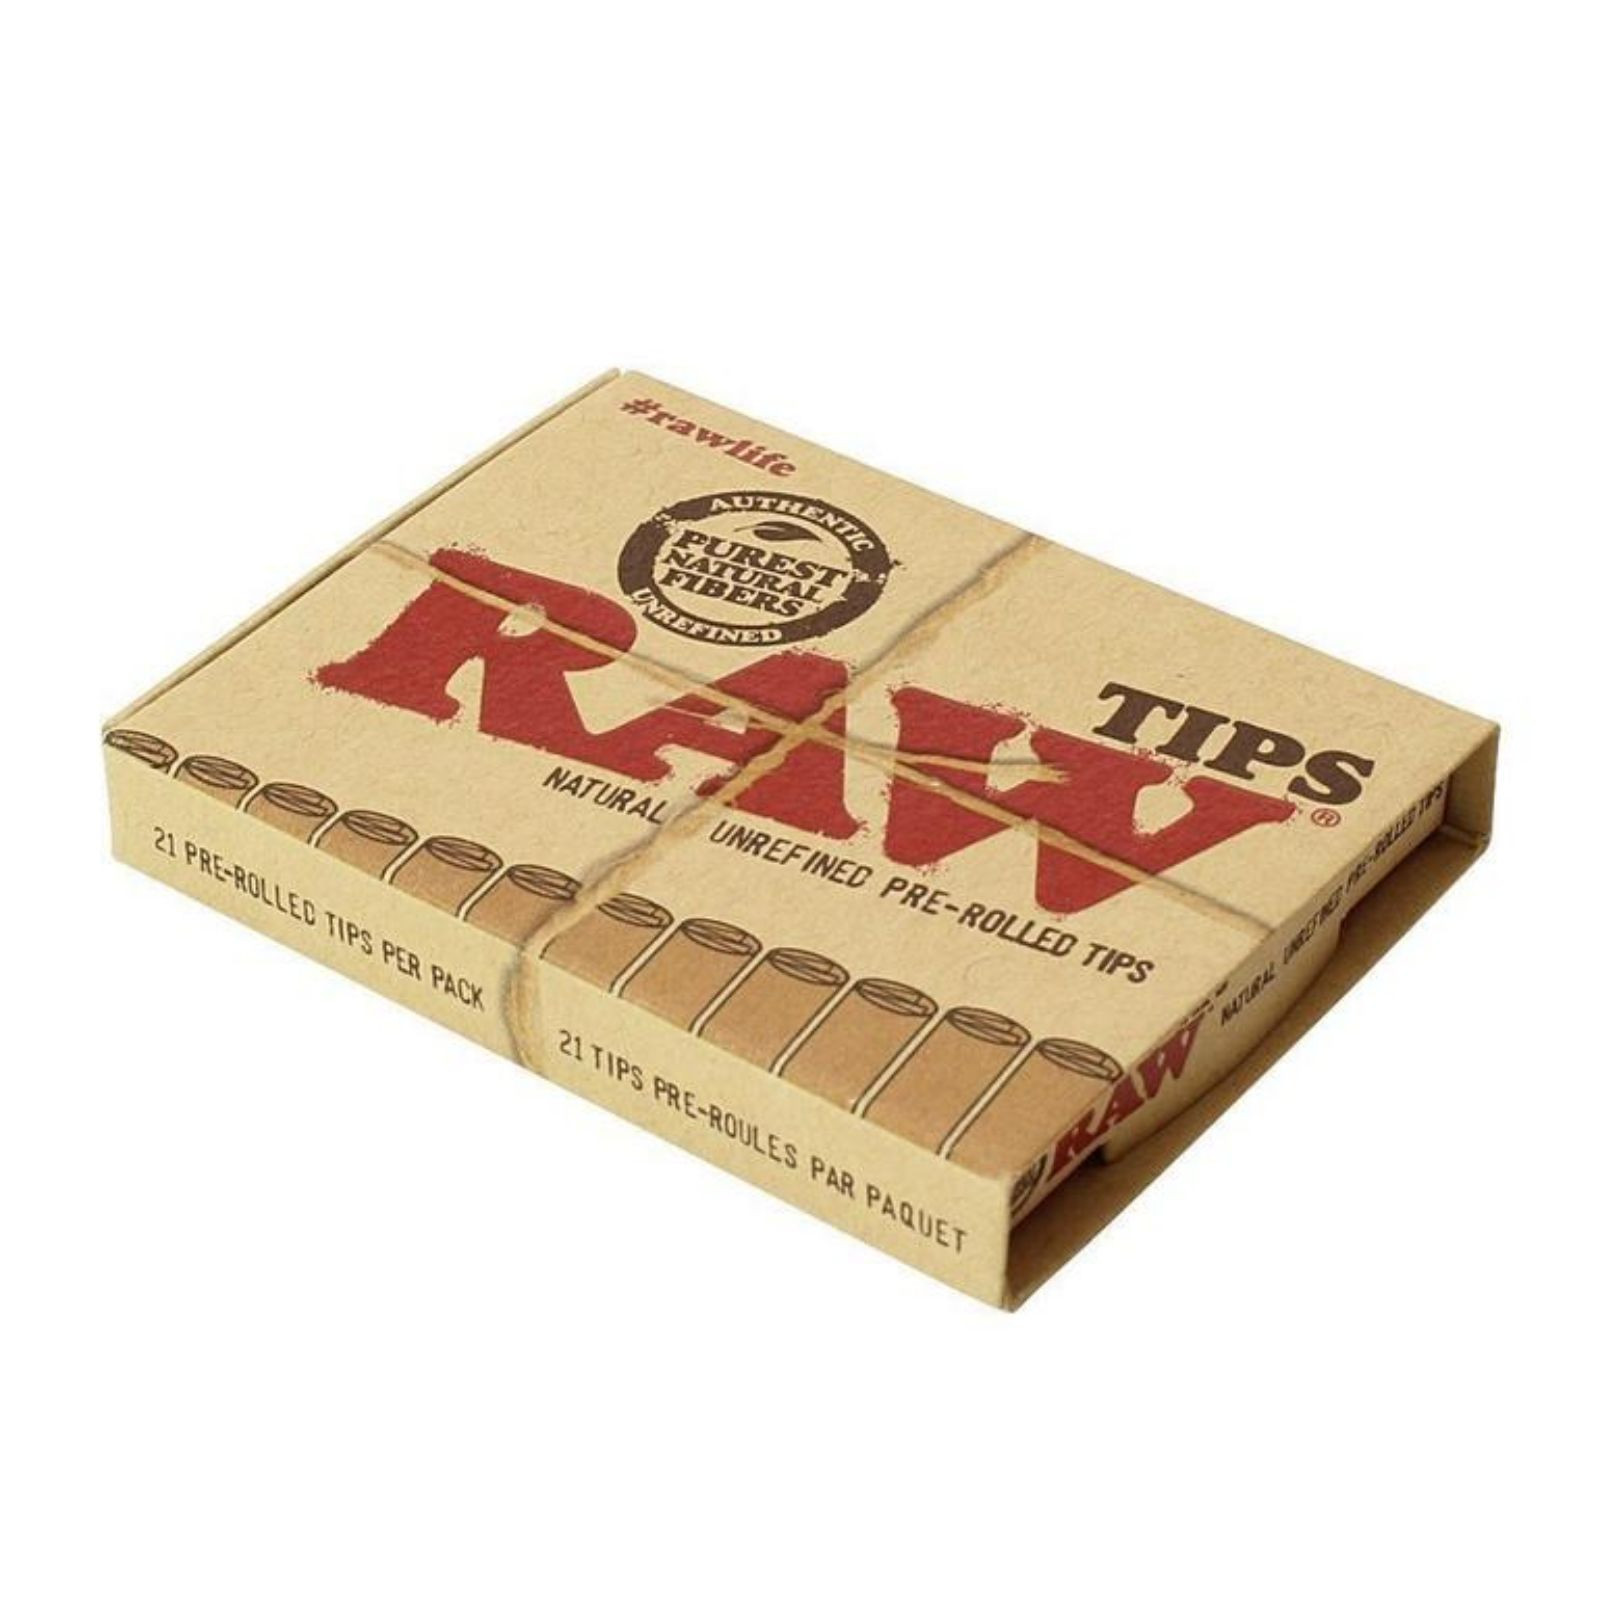 100 TIPS 2 PACKS OF RAW ROLLING PAPER  NATURAL UNREFINED FILTER TIP